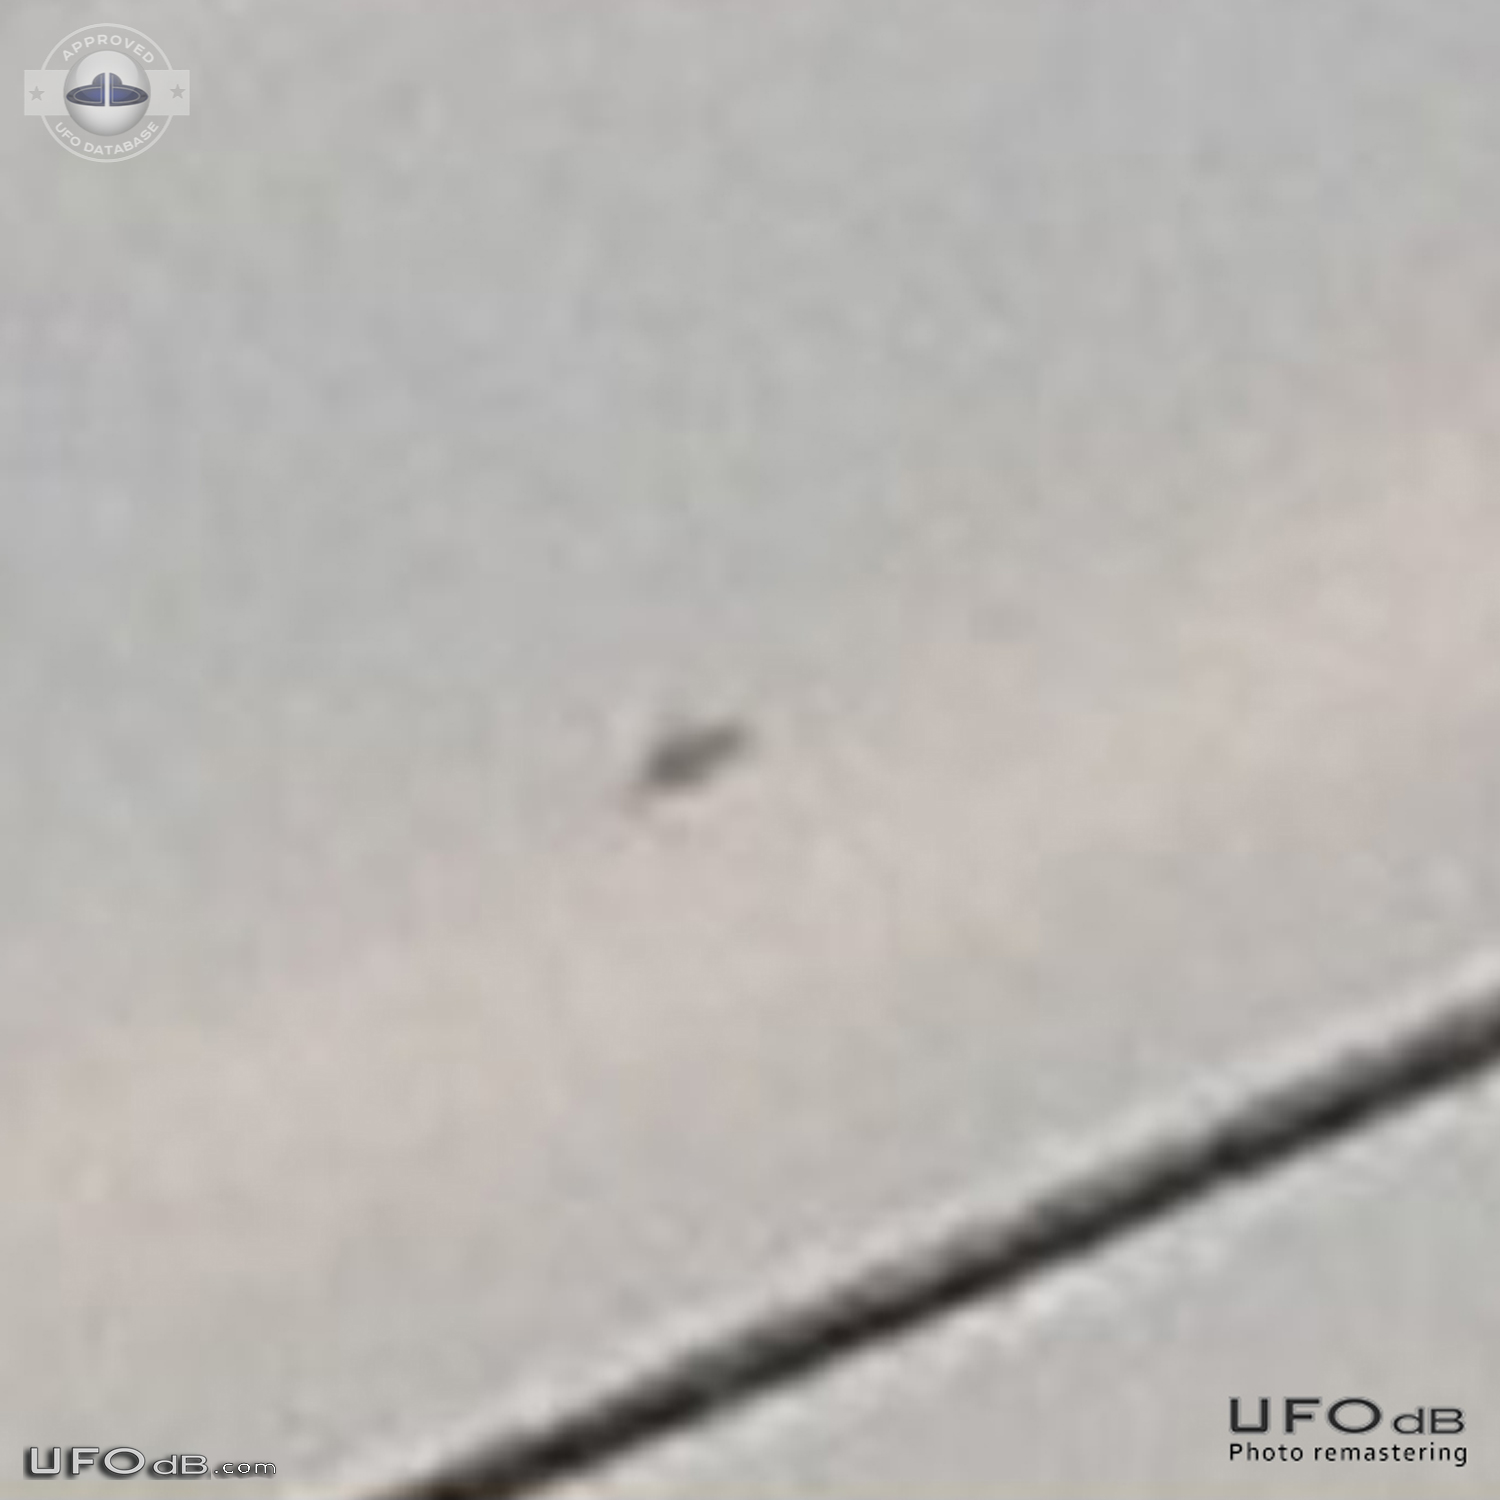 Stationary black orb observed while stuck in traffic in Aurora Colorad UFO Picture #848-3